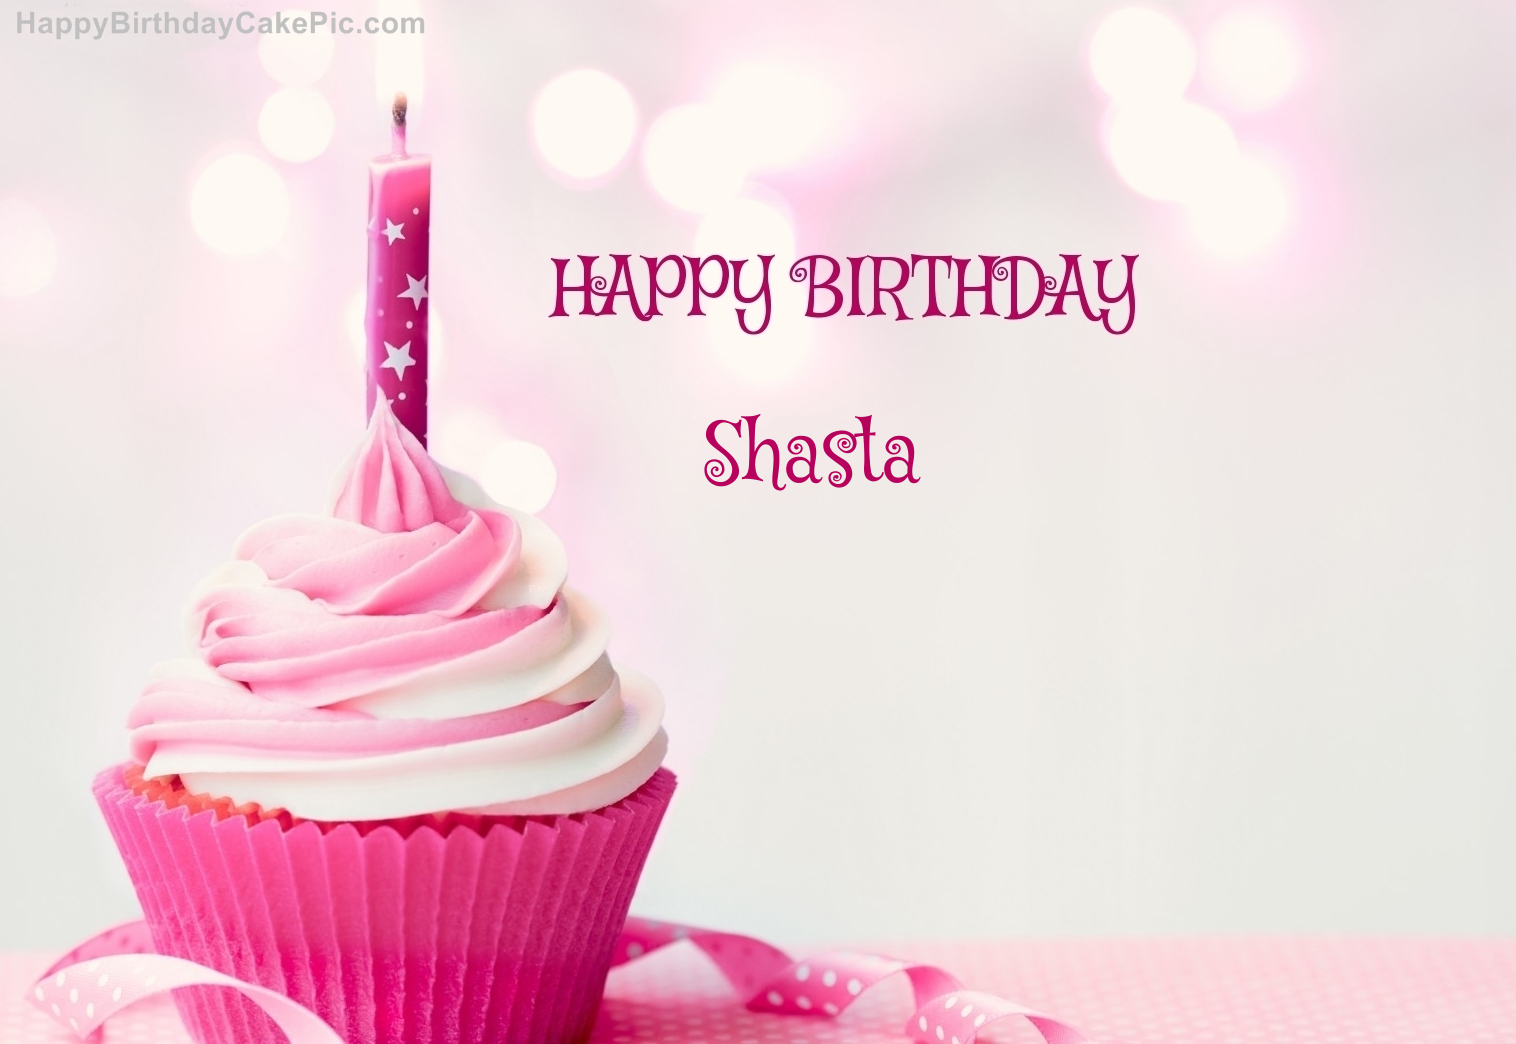 happy-birthday-cupcake-candle-pink-picture-for-Shasta.jpg